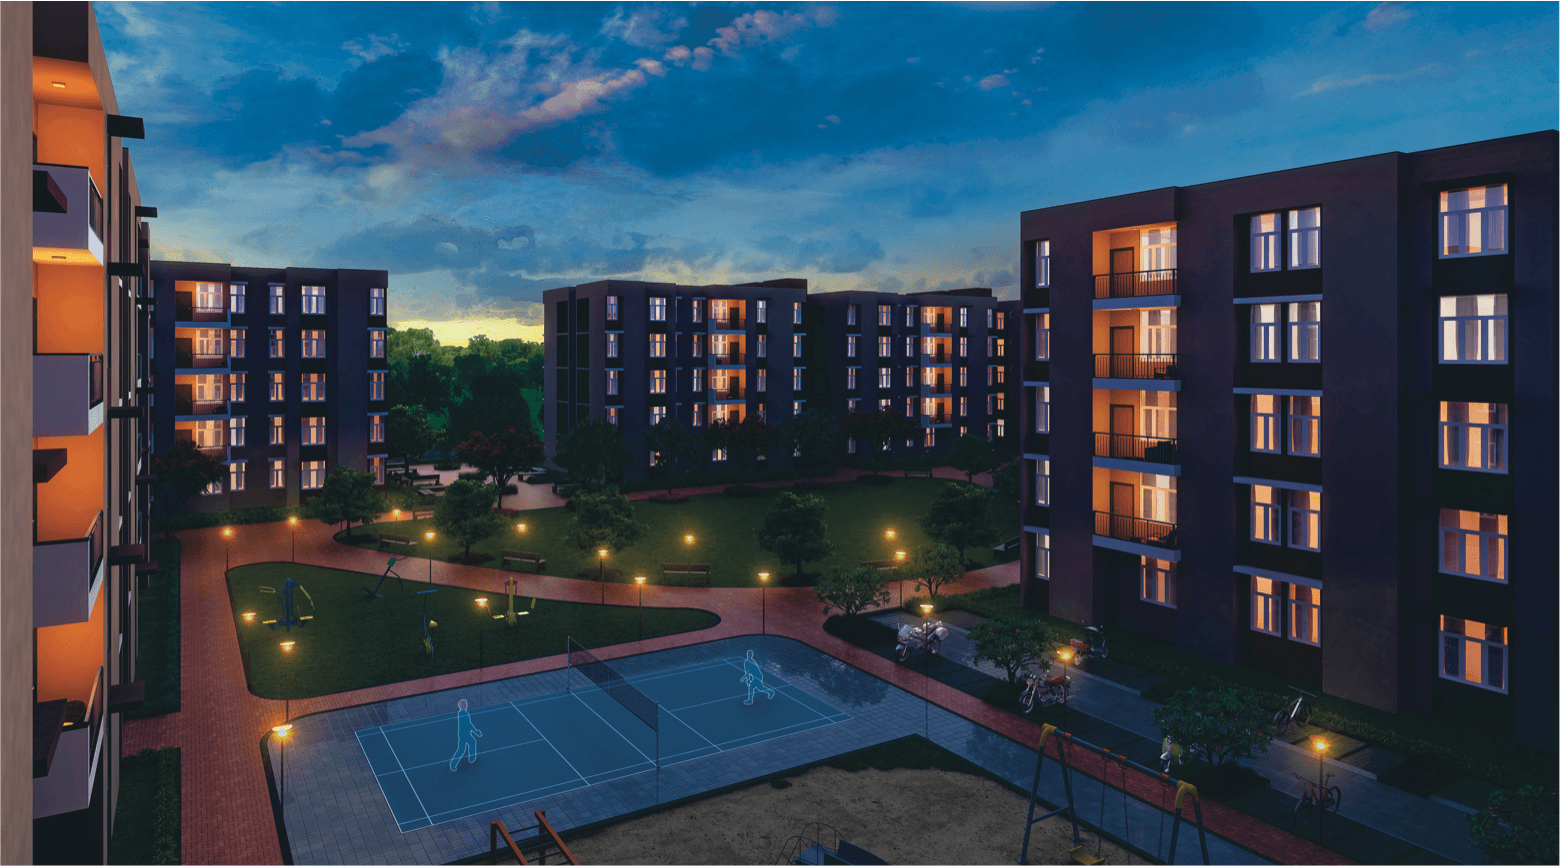 H-CARE apartments at night overlooking tennis court